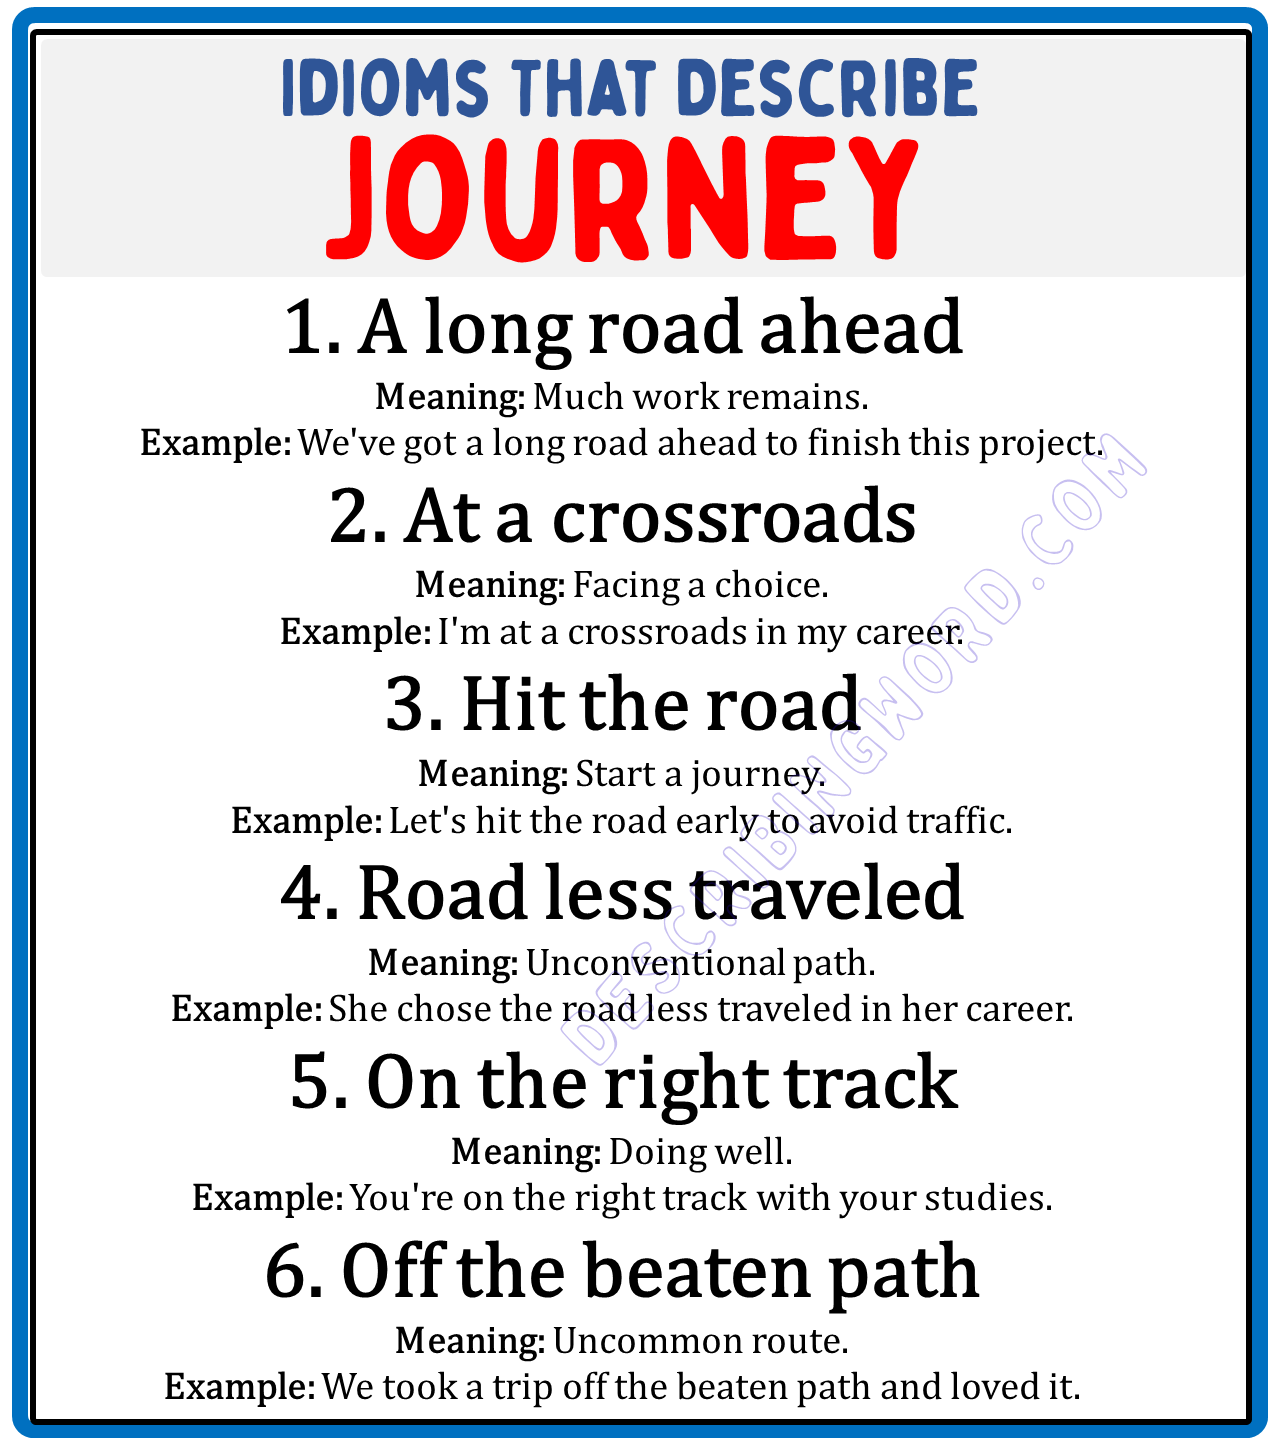 Idioms That Describe Journey